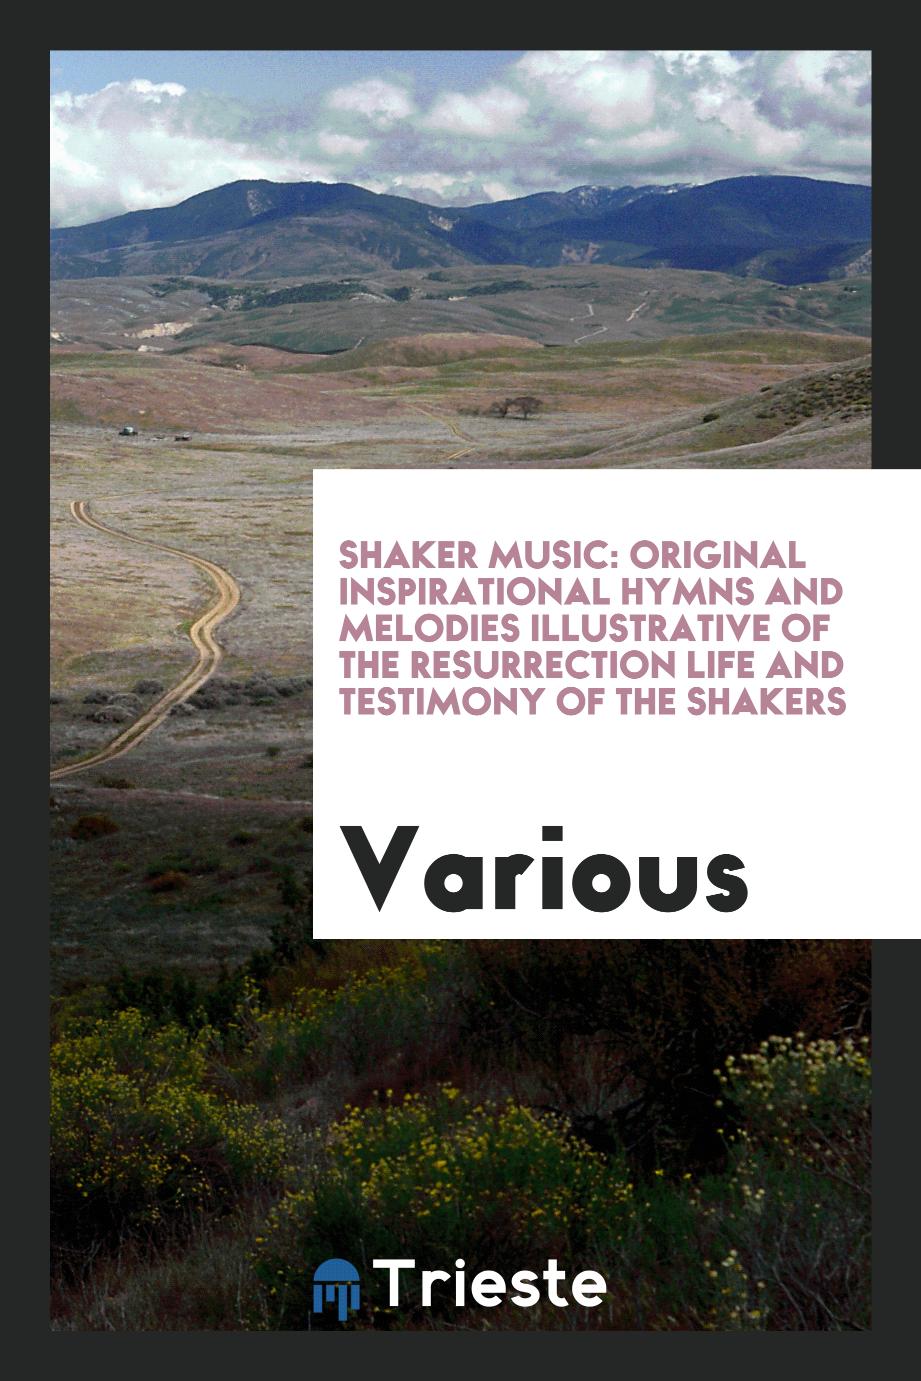 Shaker music: original inspirational hymns and melodies illustrative of the resurrection life and testimony of the Shakers